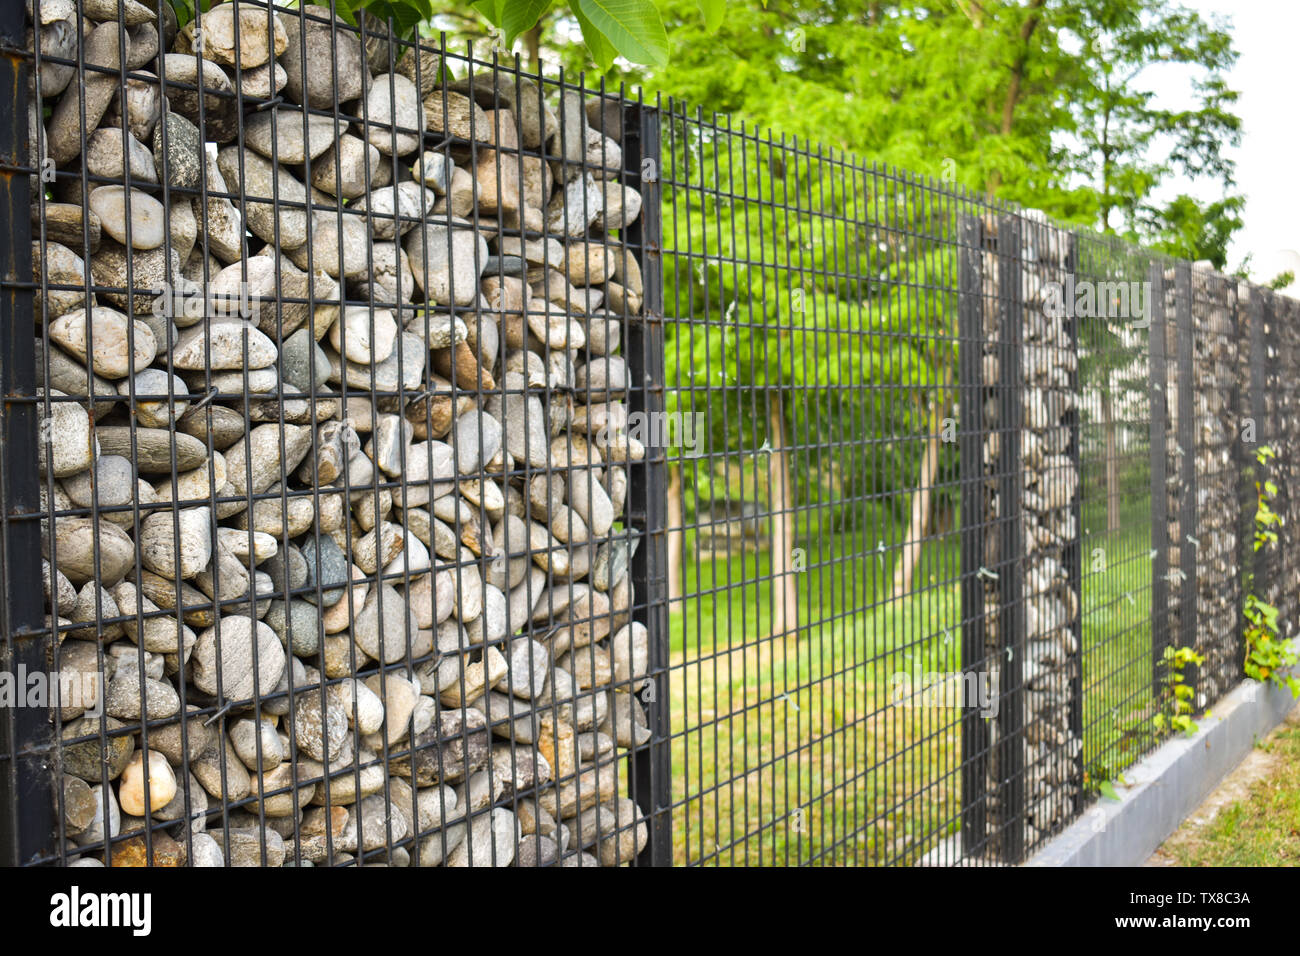 Texture of stone wall. The fence made of stone. The stone wall is tied around with black steel bars. Design ideas to make  backgrounds, banners and ar Stock Photo